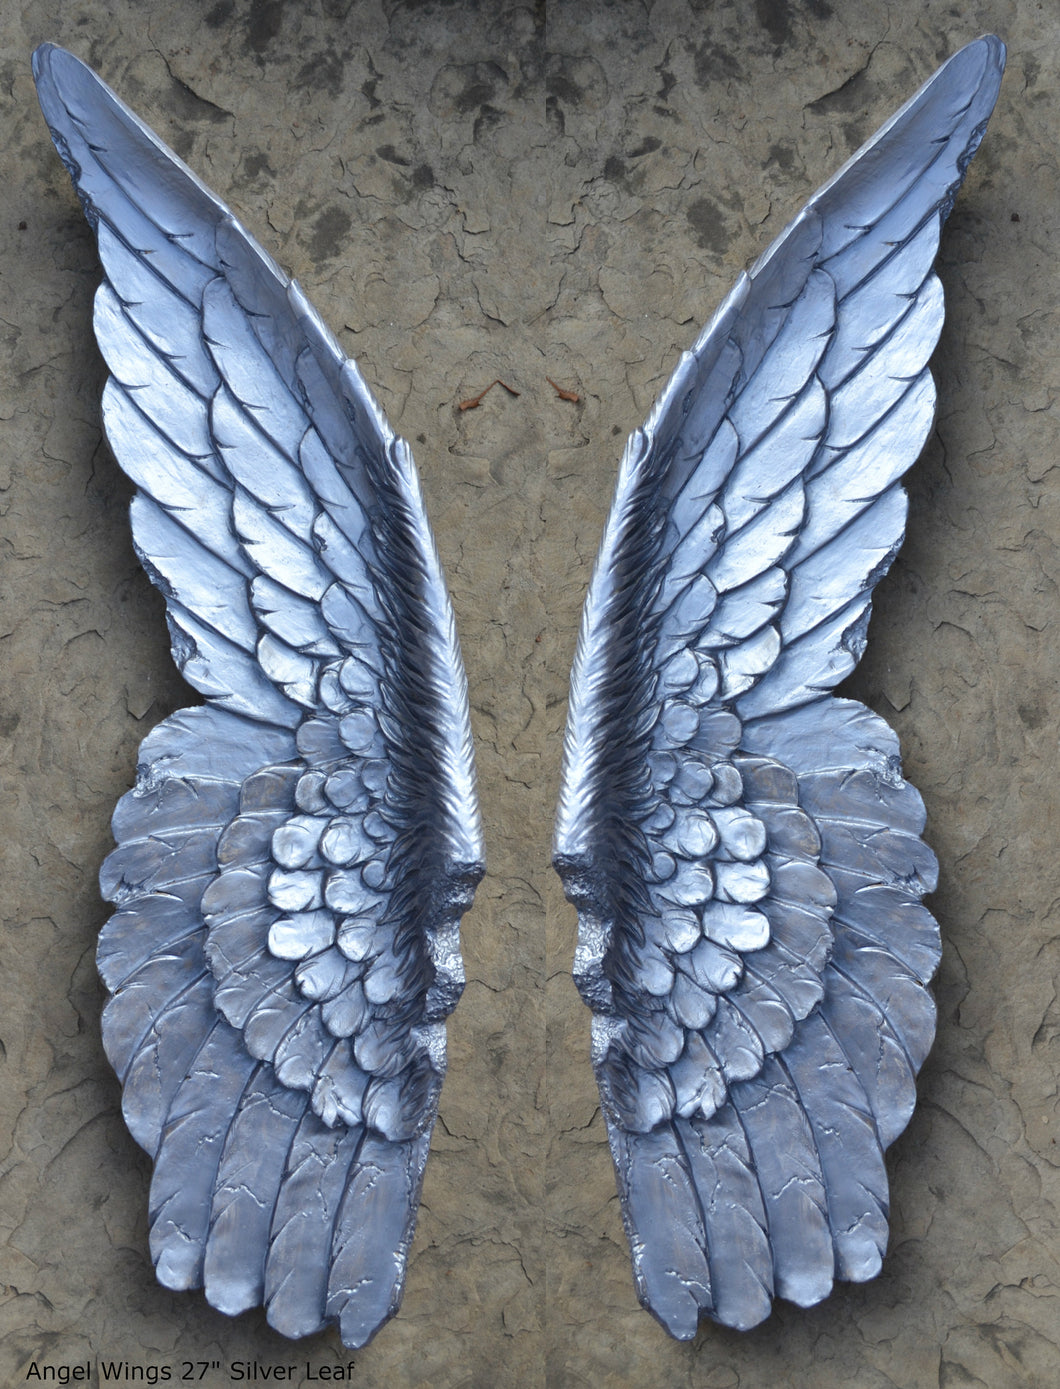 Angel Wings Aged wall sculpture statue plaque www.Neo-Mfg.com 27" Large